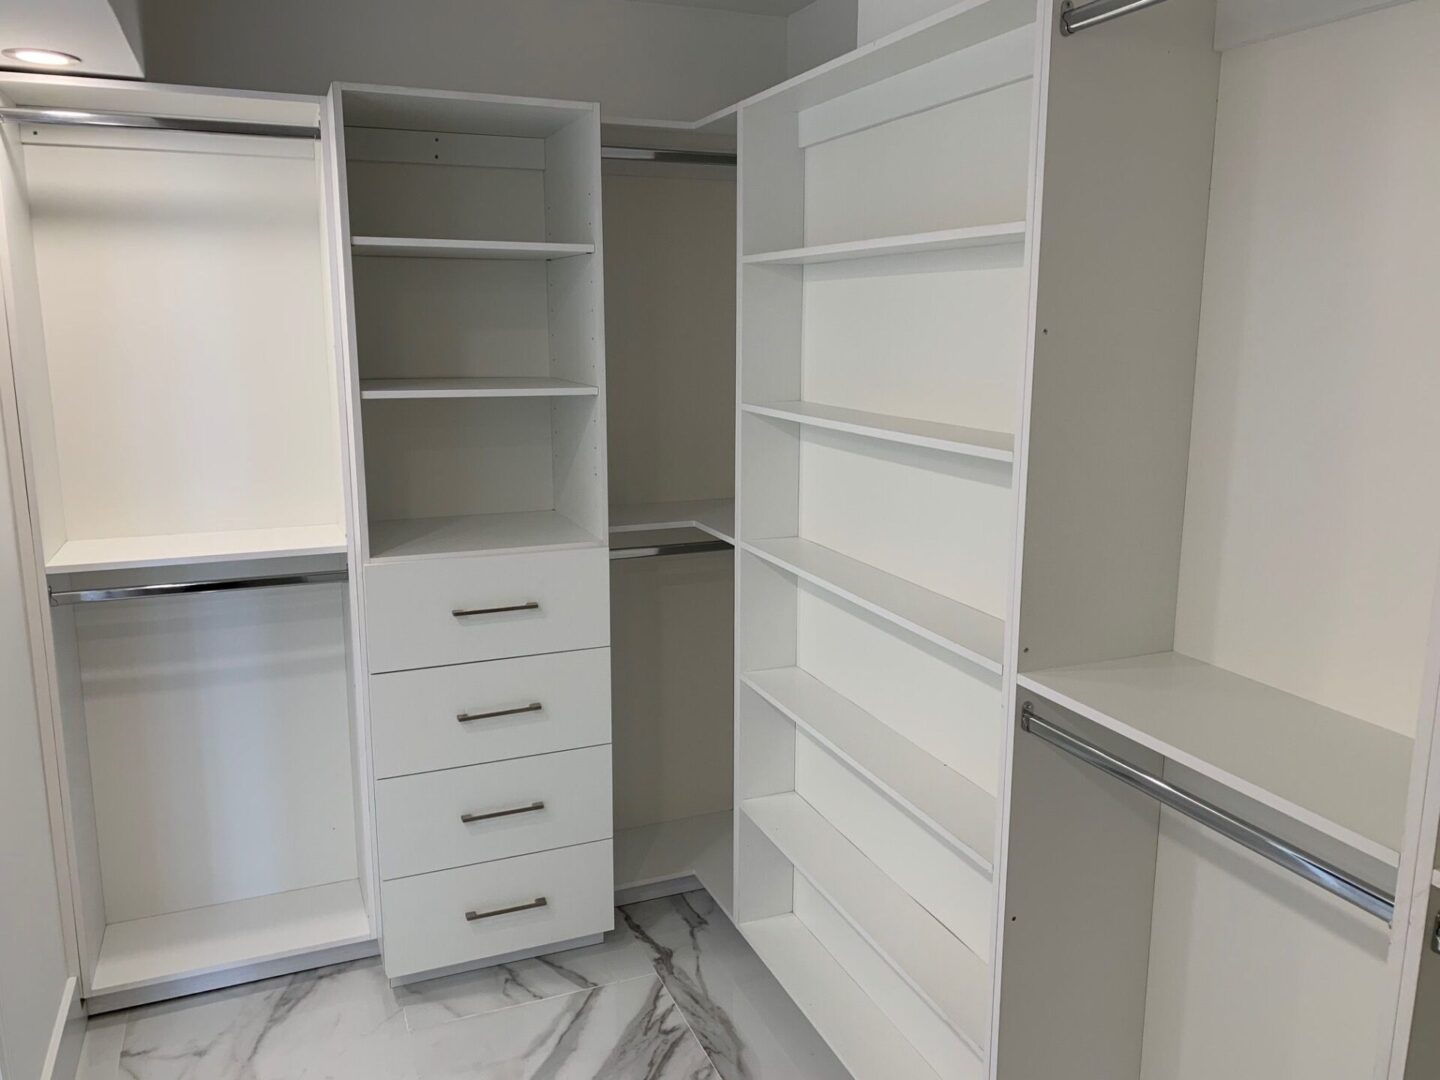 A white closet with shelves and drawers in it